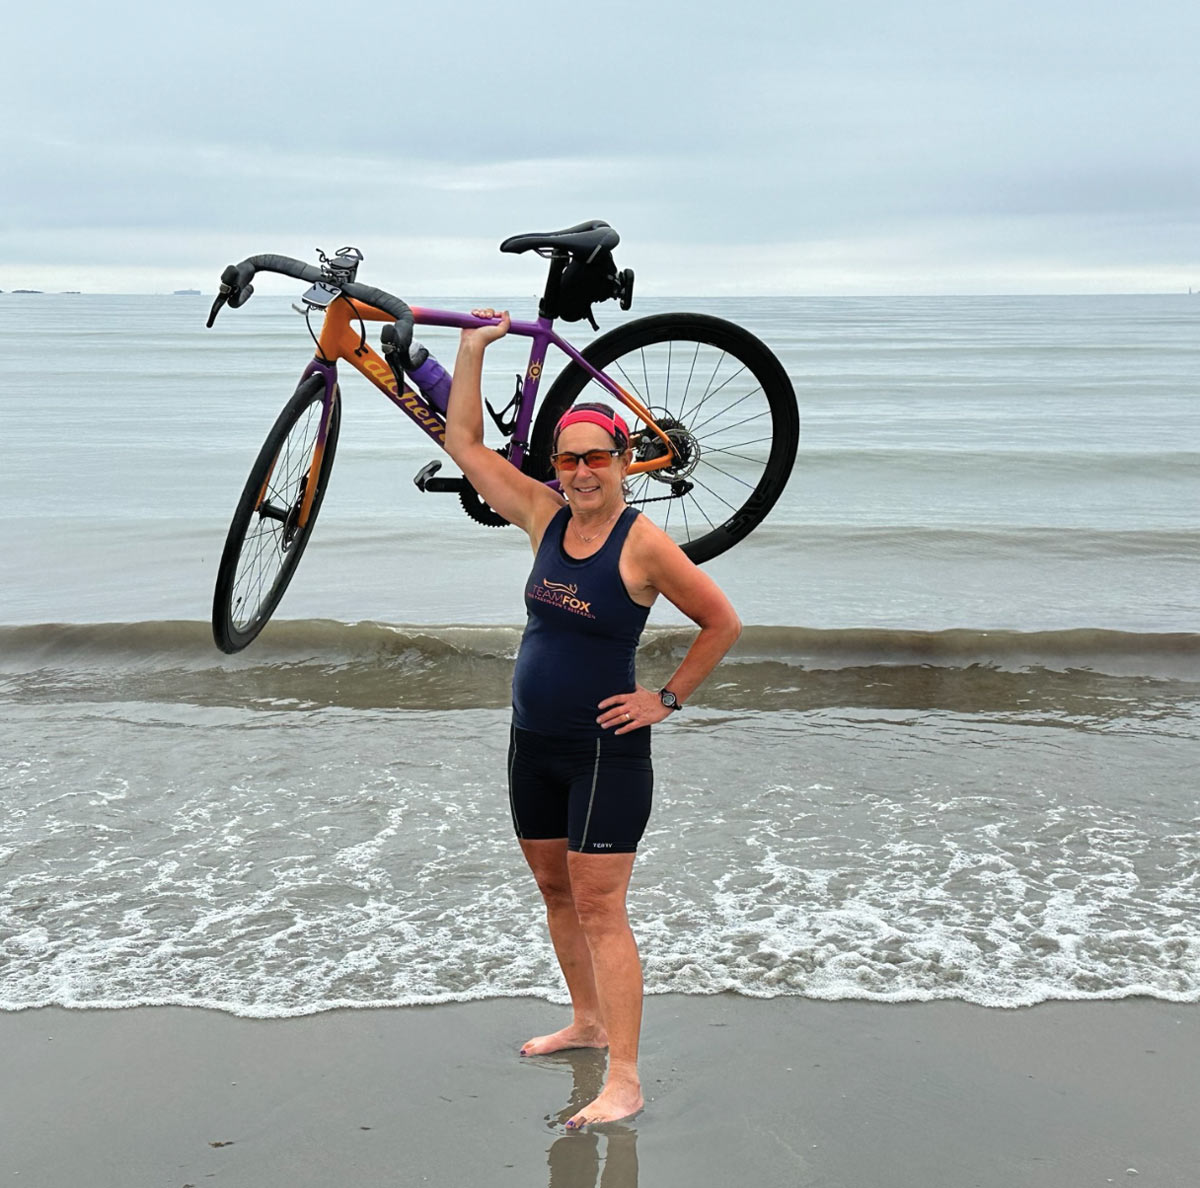 Barbara Harris stands in shallow waves on a beach, holding her bike over her head with one hand.